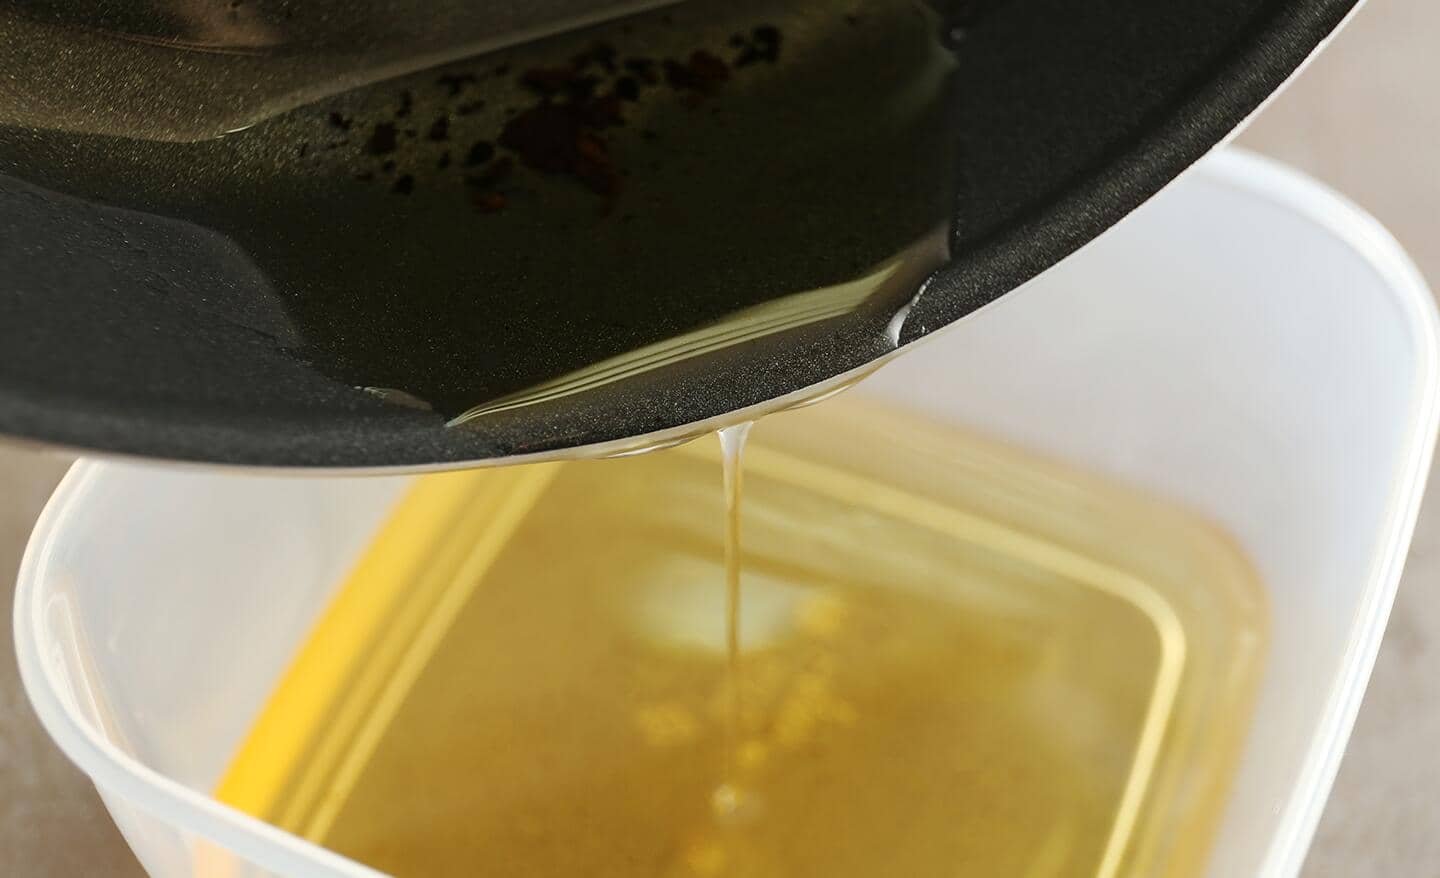 Oil is poured from a frying pan into a container.